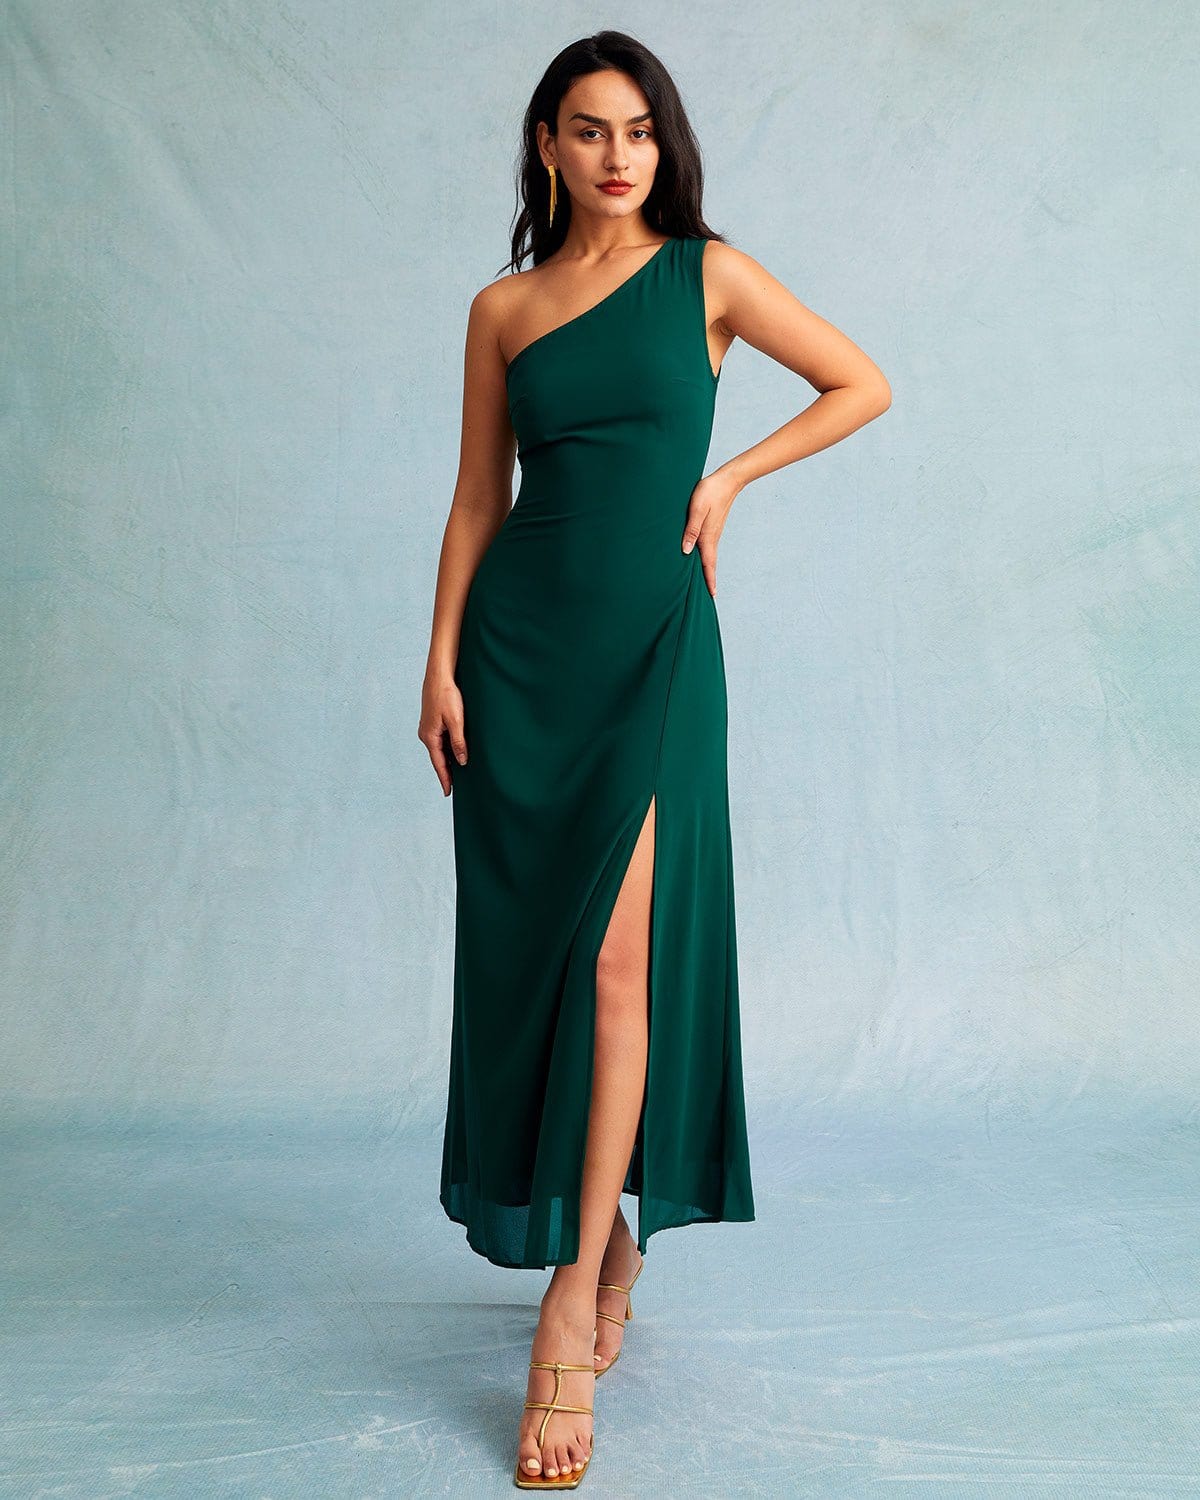 SIMKHAI Cameron One Shoulder Dress in Green. Size 2, 4. | MILANSTYLE.COM